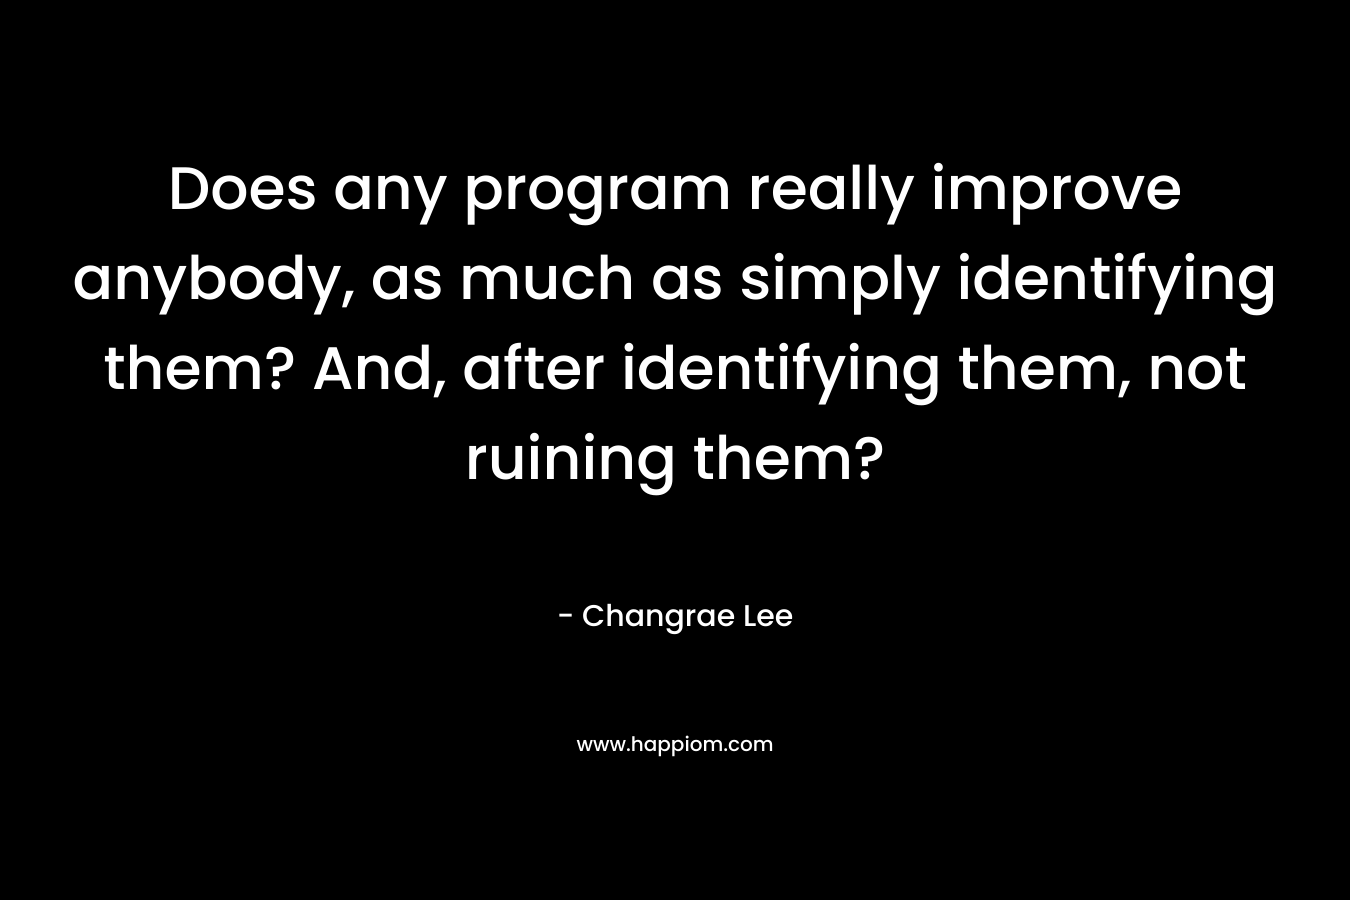 Does any program really improve anybody, as much as simply identifying them? And, after identifying them, not ruining them? – Changrae Lee